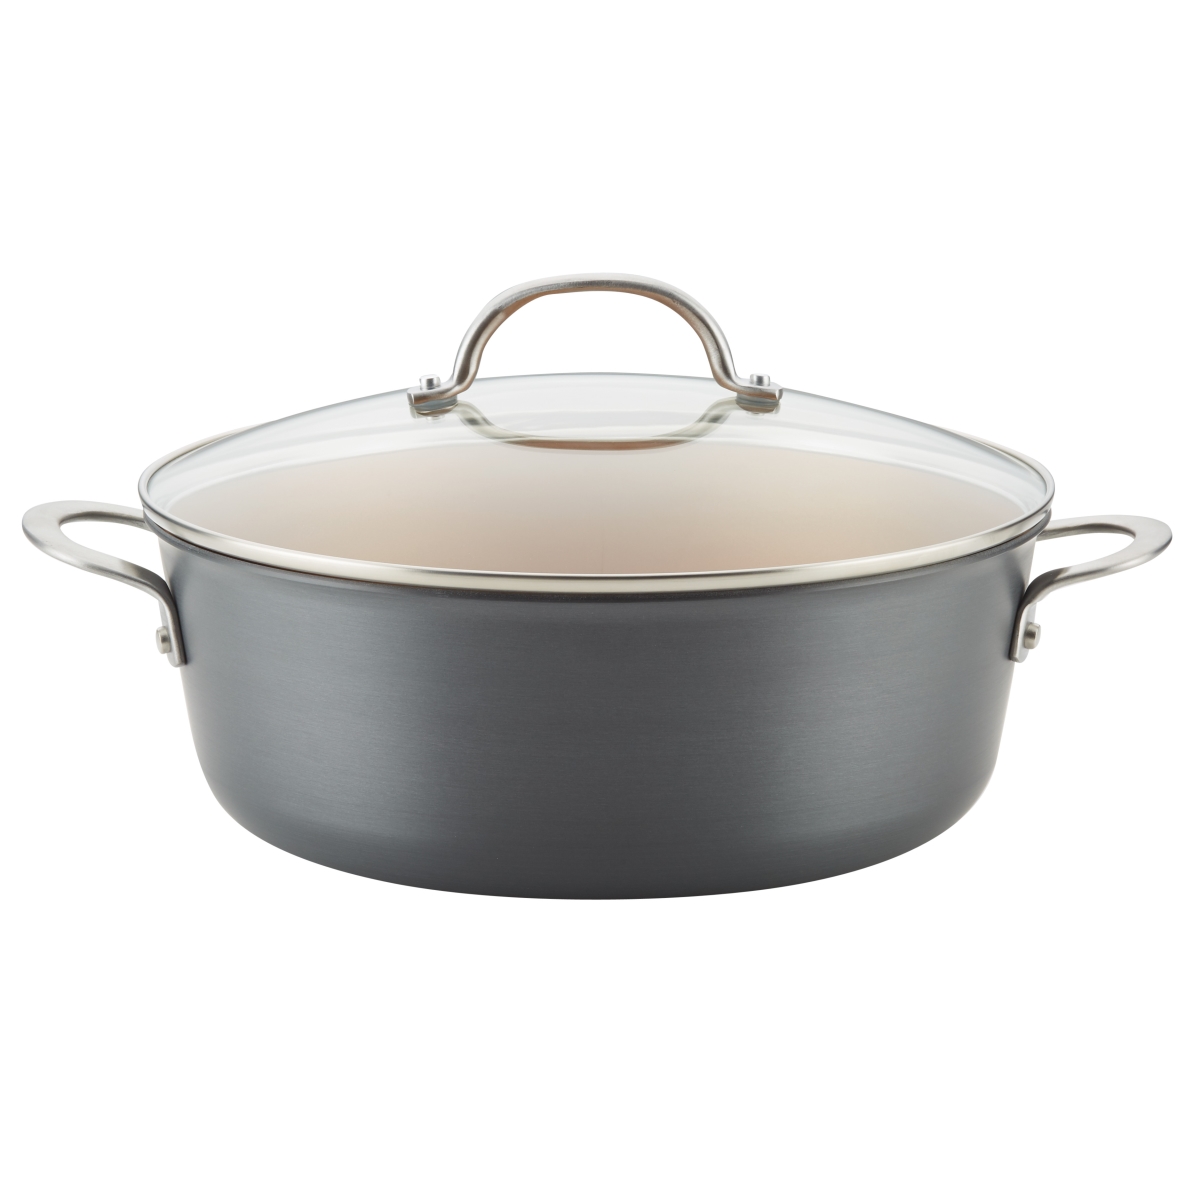 80189 7.5 Qt. Hard-anodized Aluminum Nonstick One Pot Meal Stockpot - Charcoal Gray